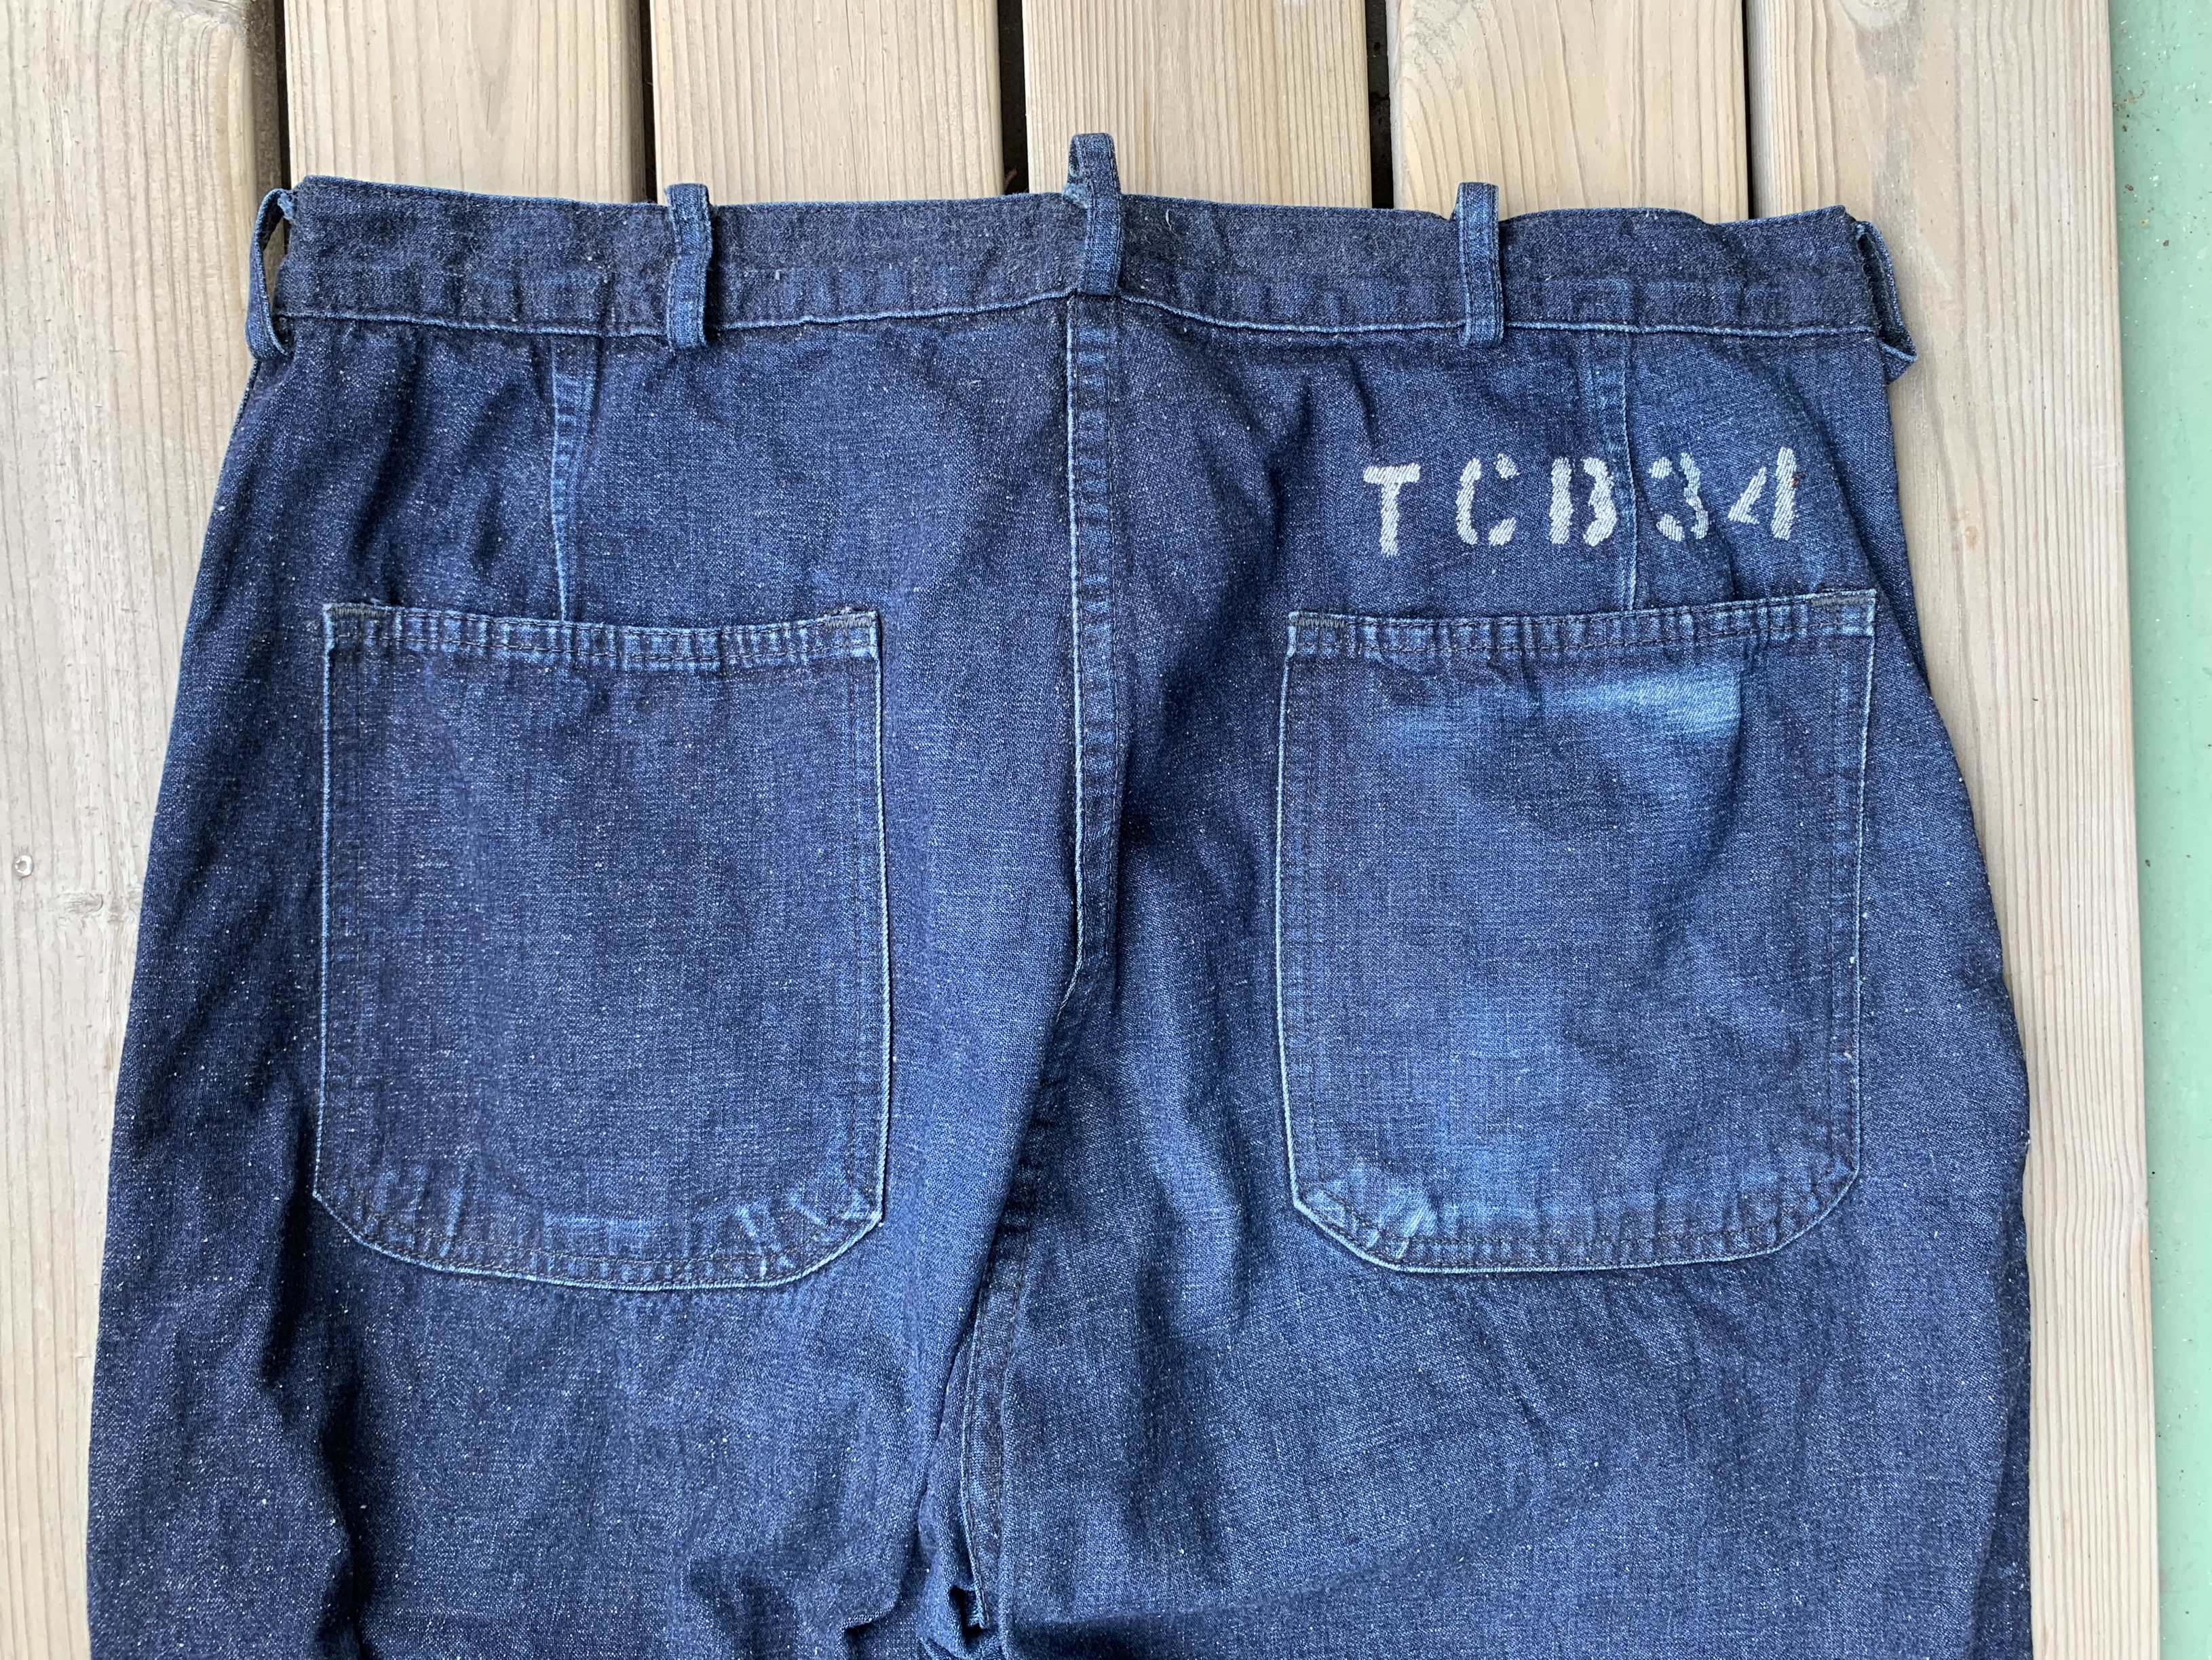 TCB Seamens trousers backpockets 6 months of wear